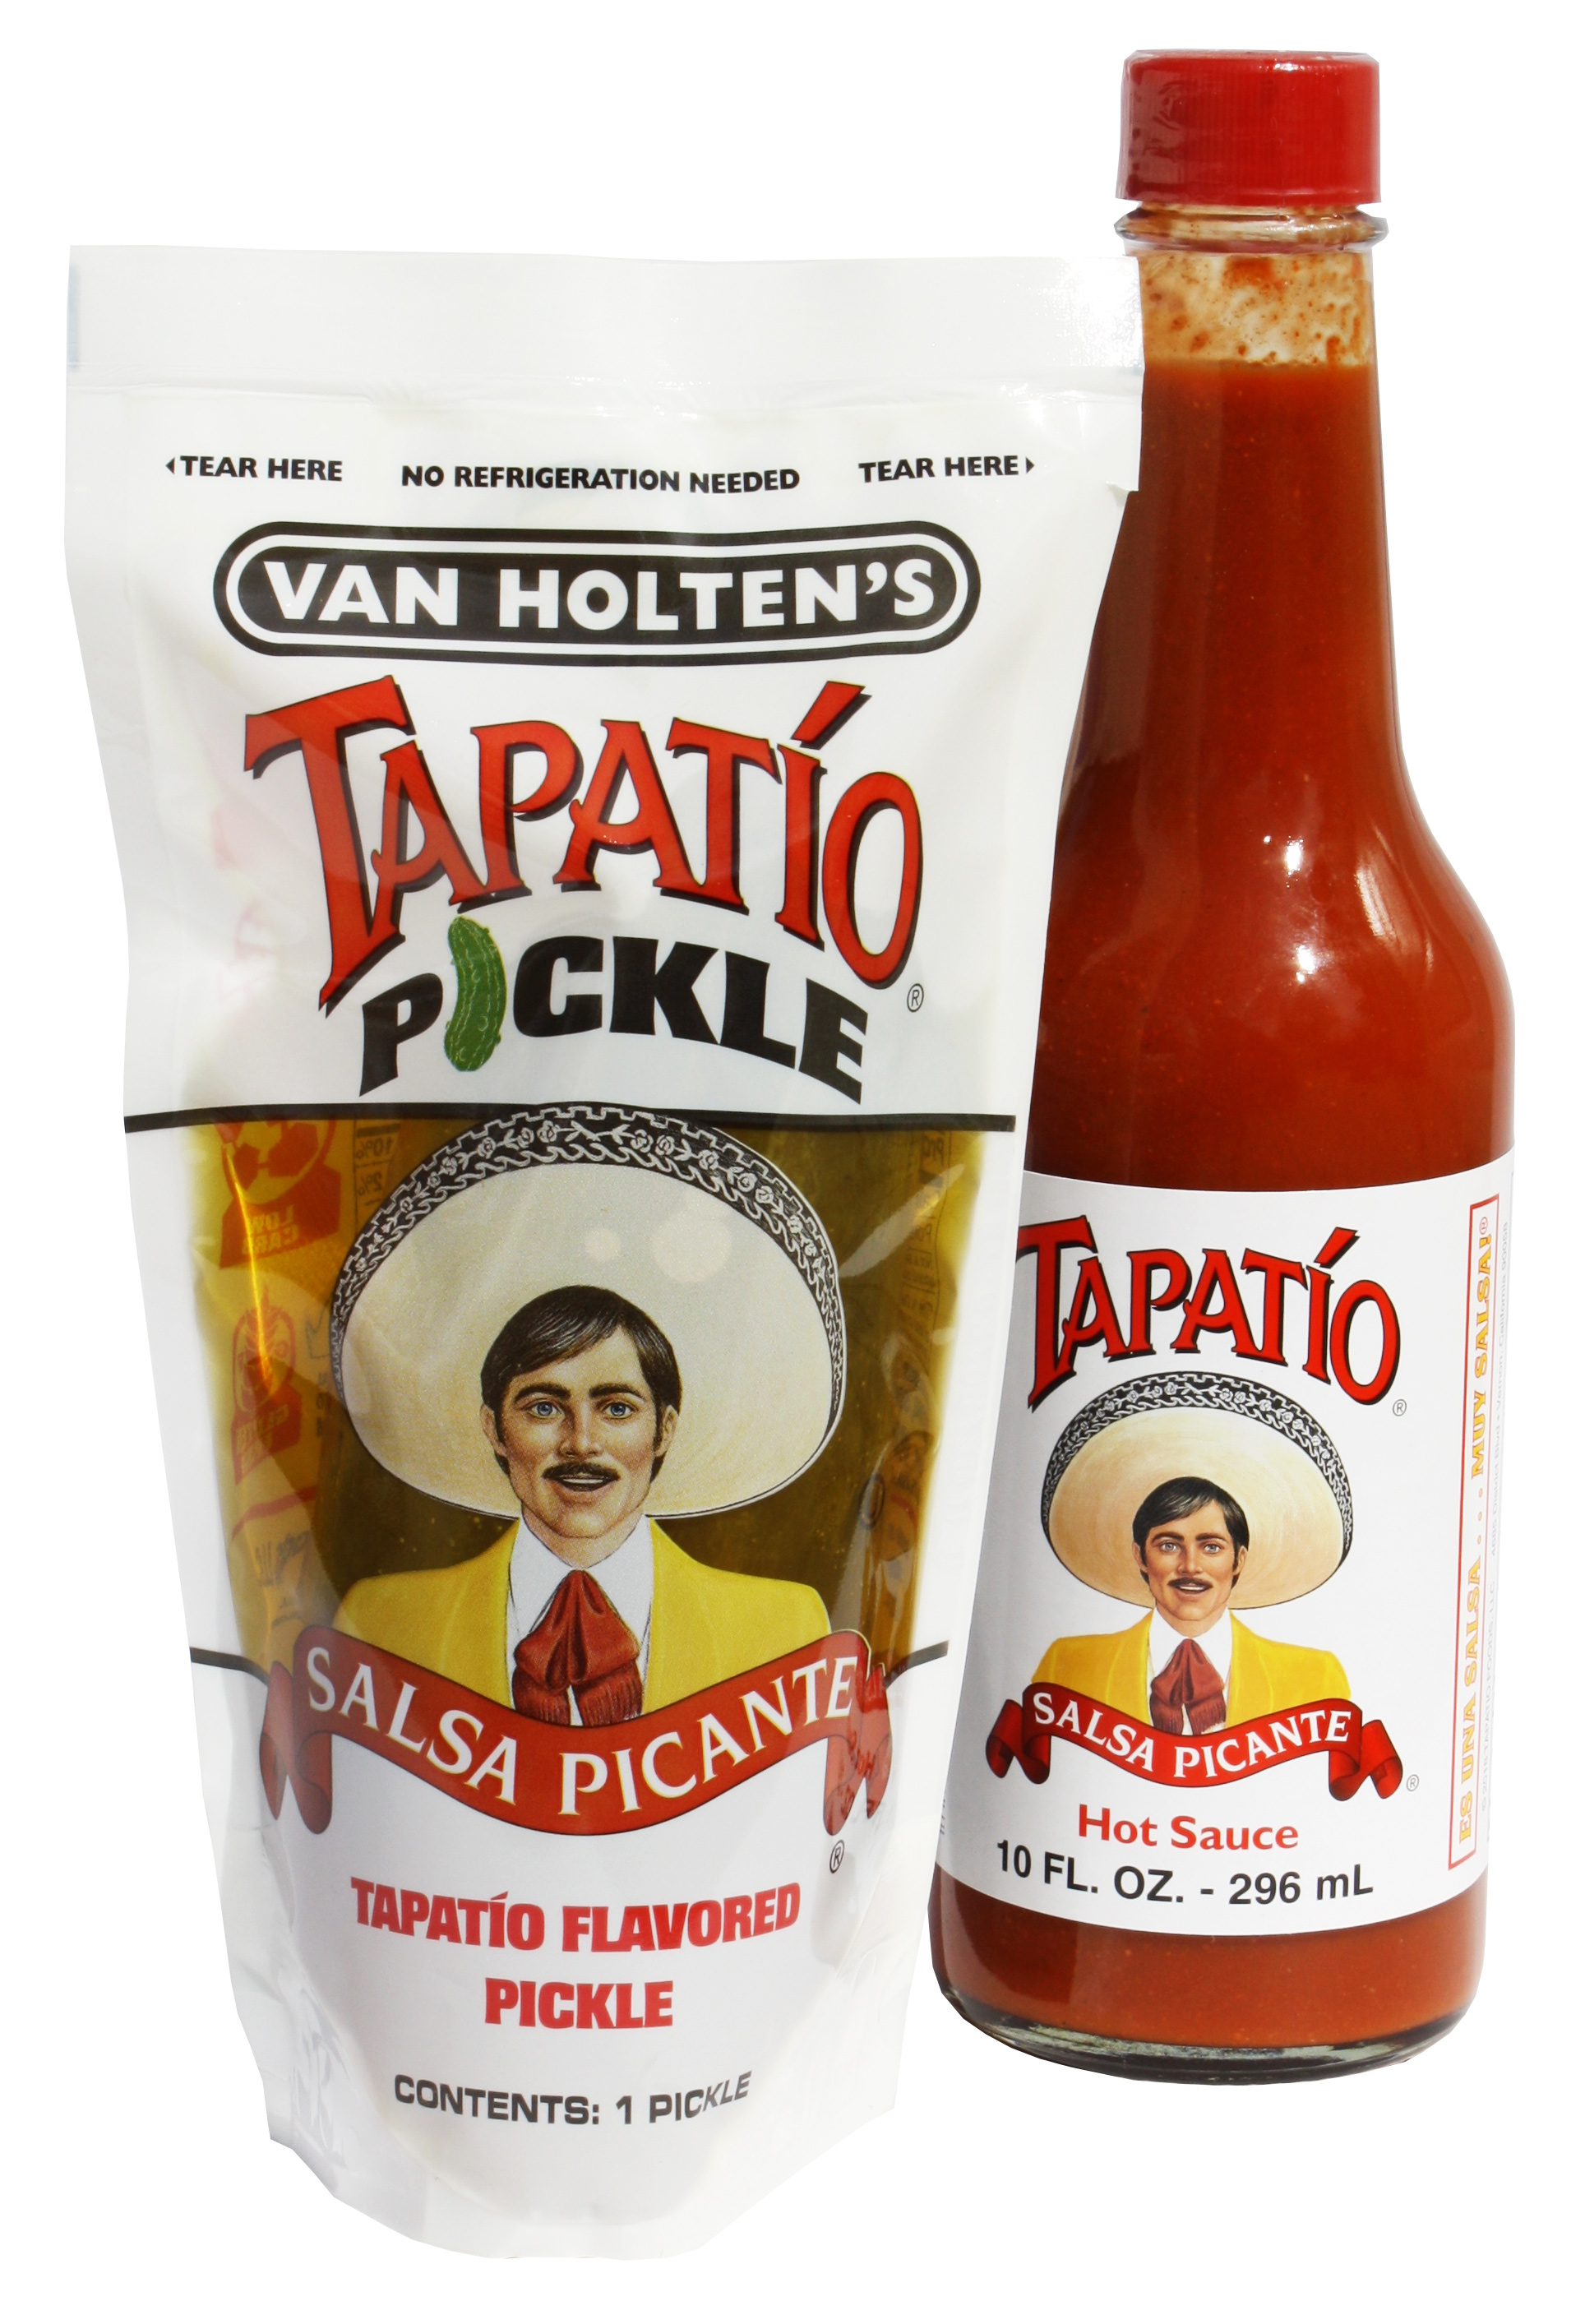 Tapatio Pickle and Tapatio Bottle